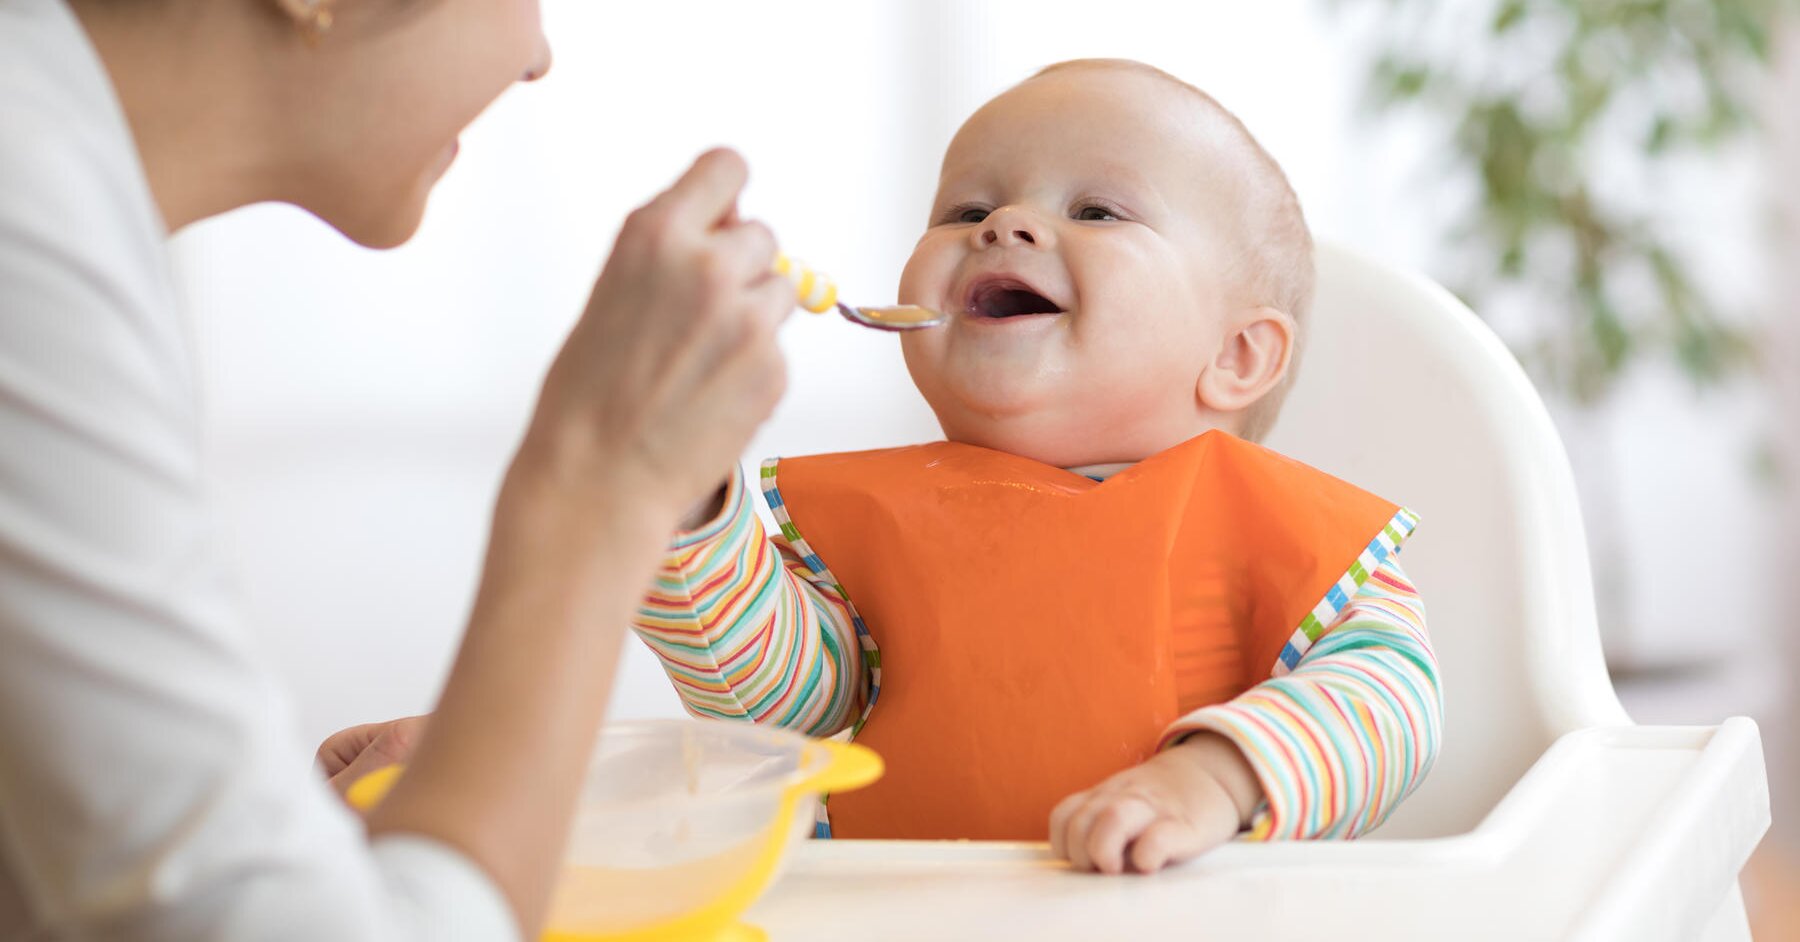 When Do Babies Start Eating Solid Food?